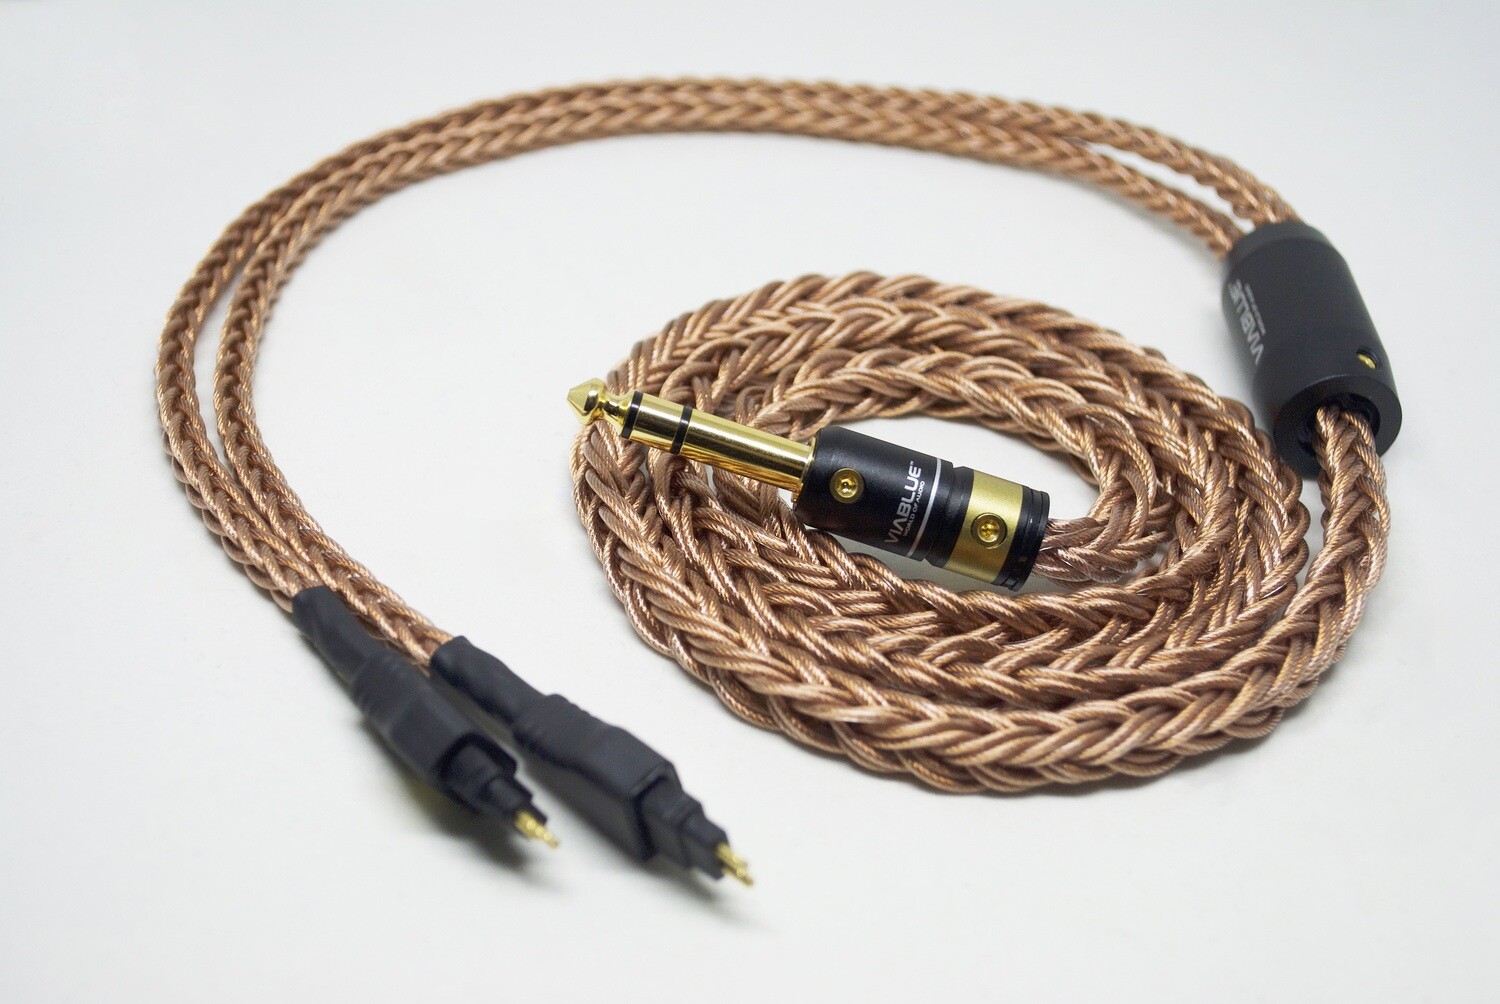 X16 Series Custom Cable for Headphones